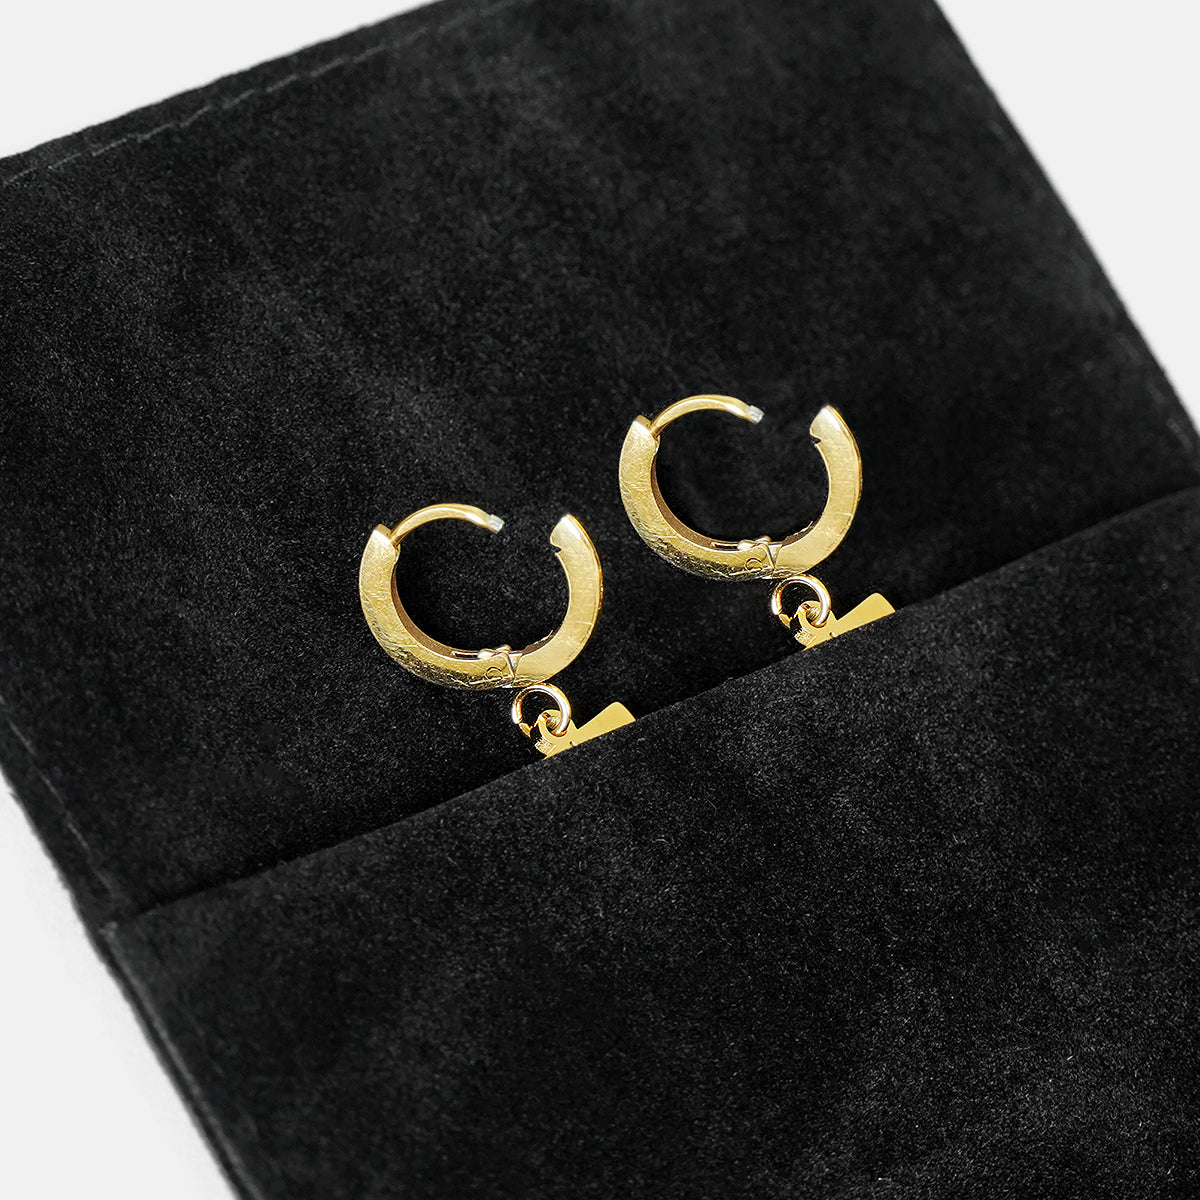 98 Number Earring - Gold Plated Stainless Steel